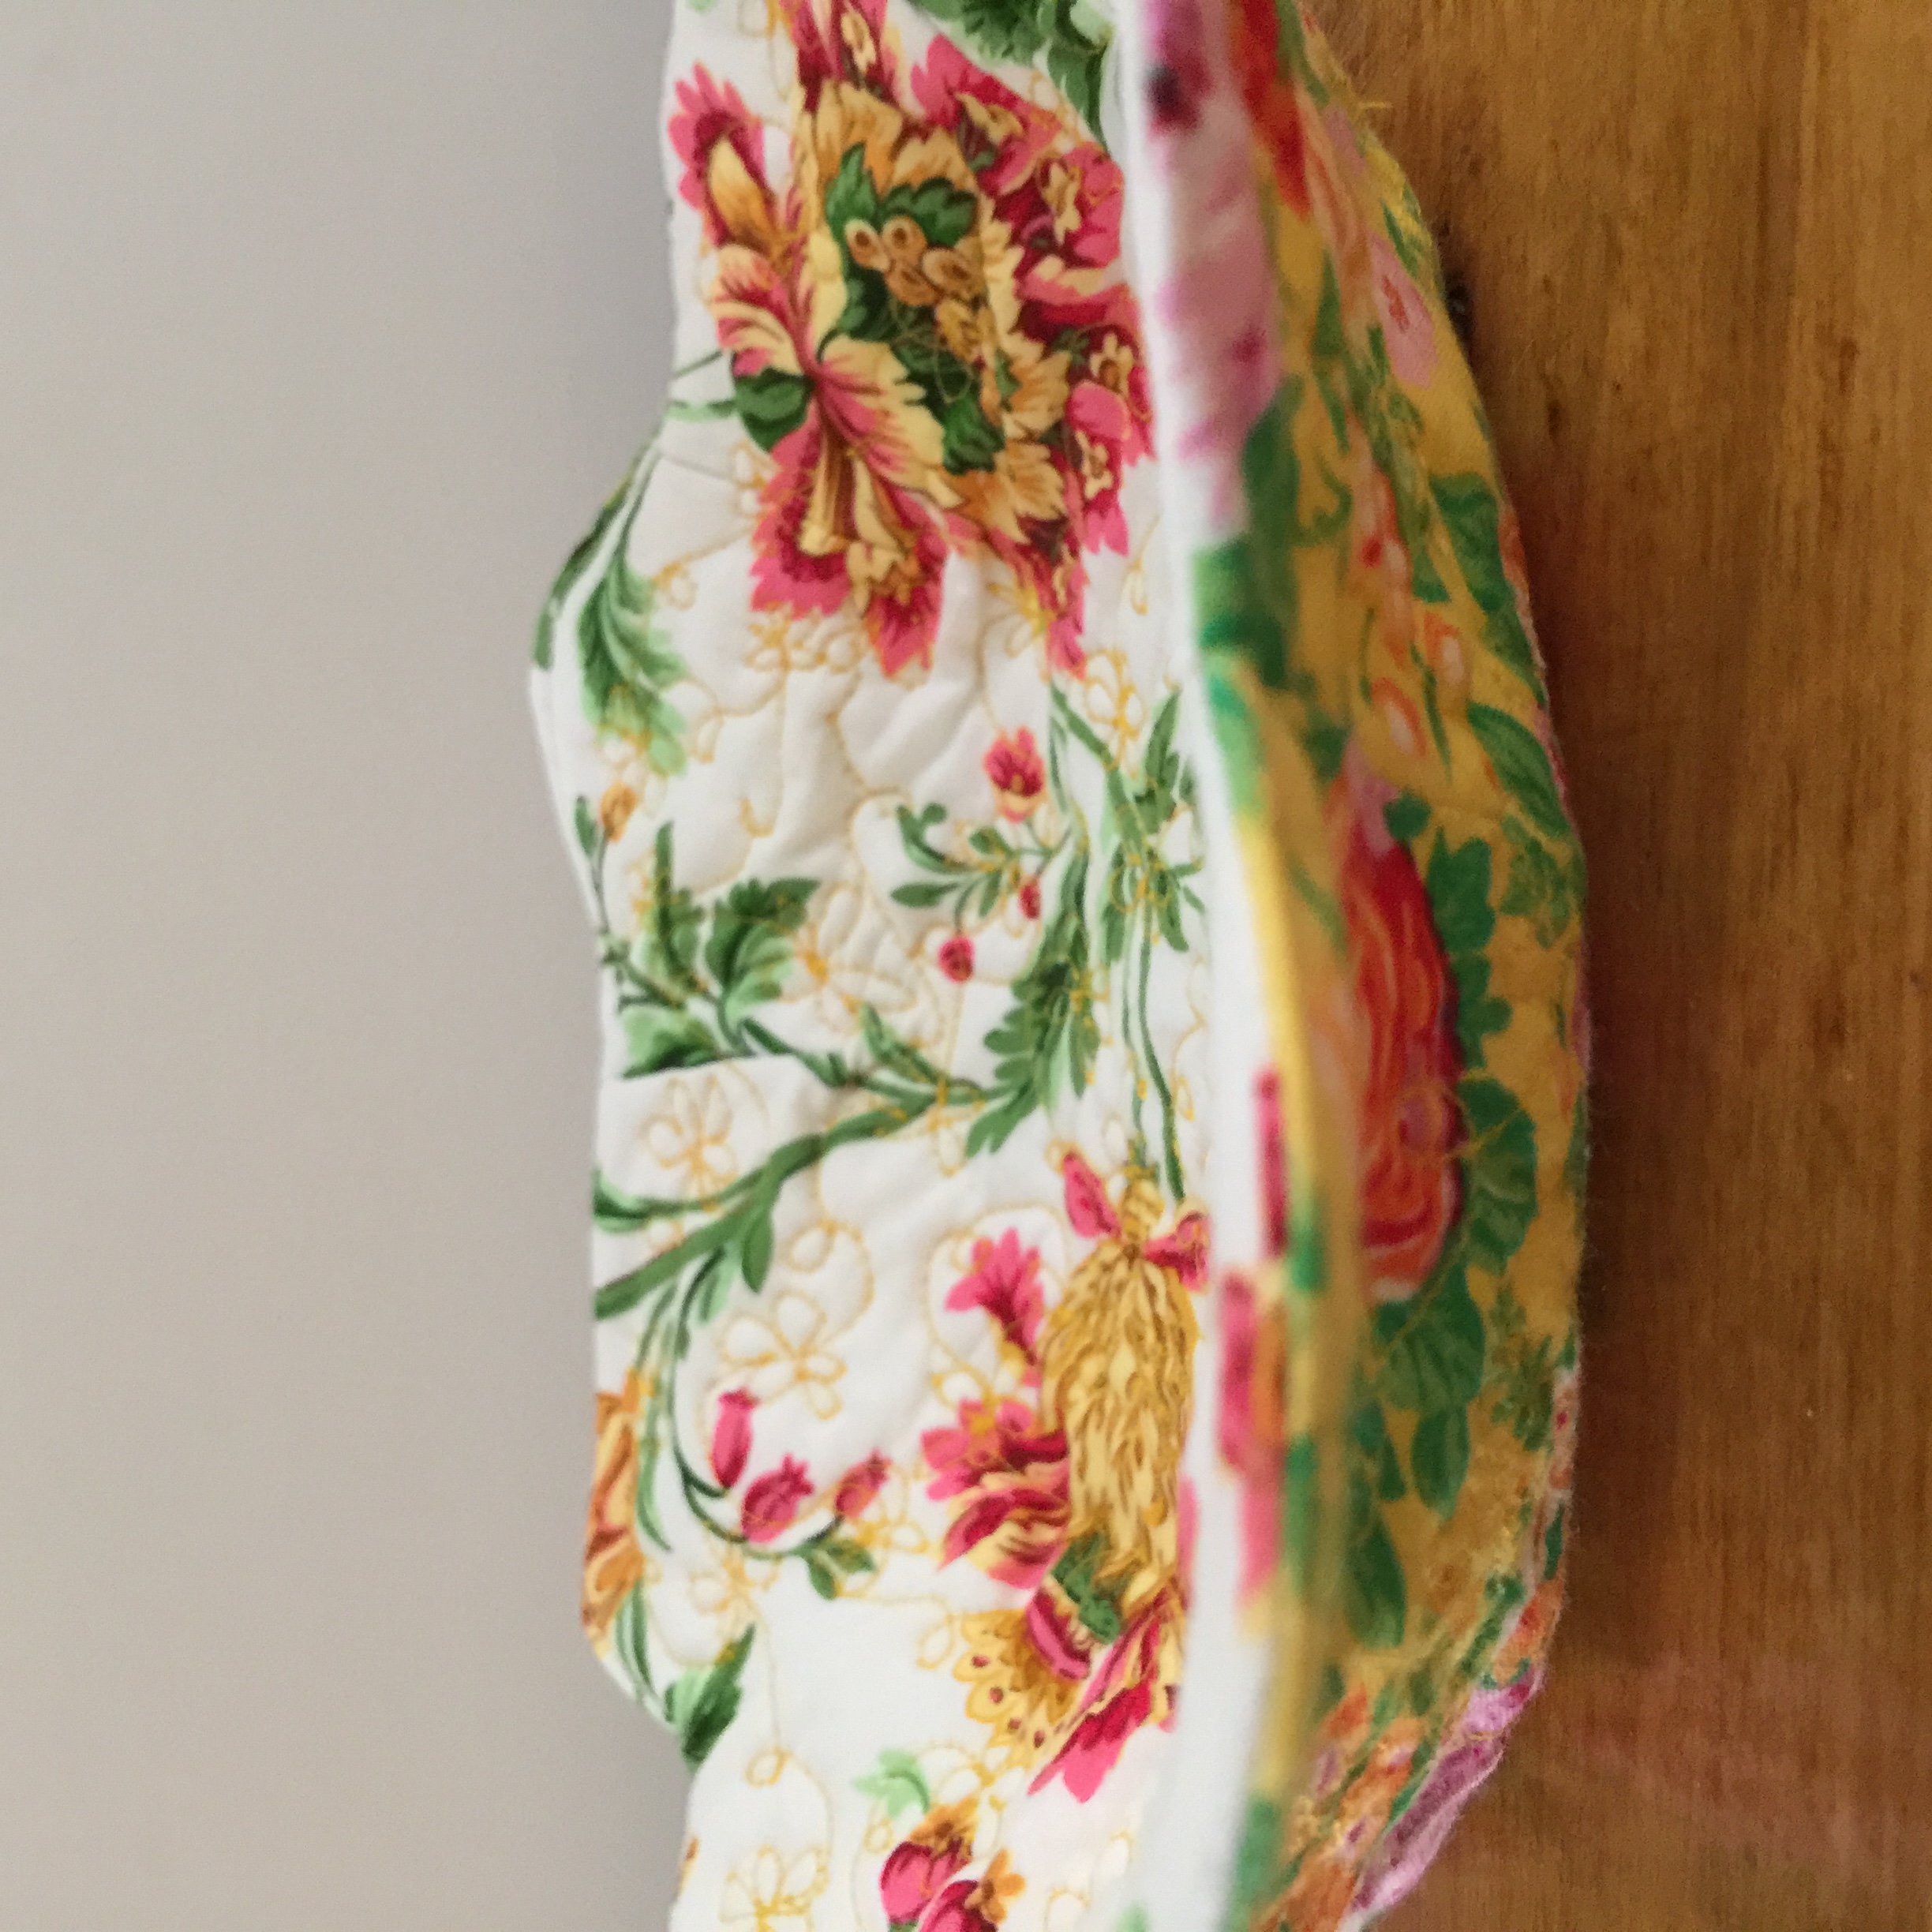 How to make quilted microwave bowl cozy holders - Tulip Square